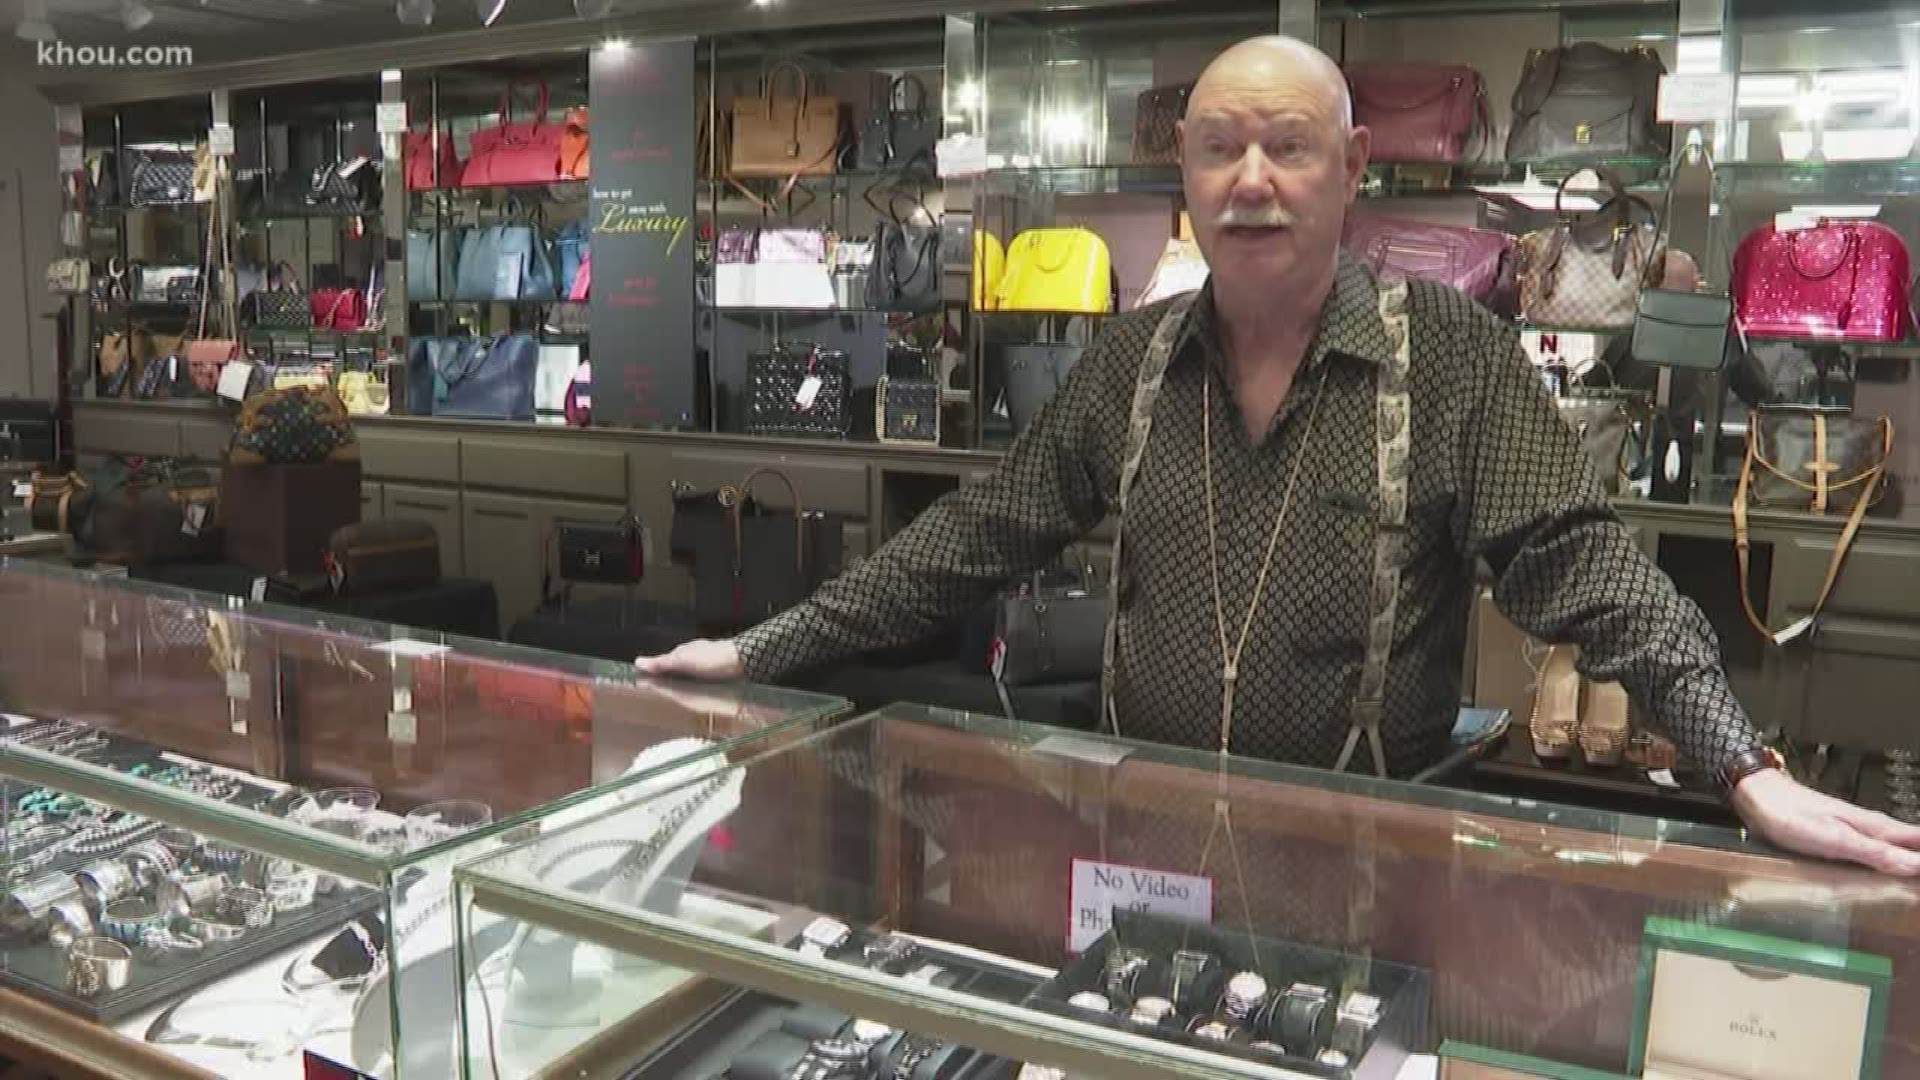 With thousands of federal workers missing their second paycheck during the government shutdown, many are turning to pawn shops to sell their possessions ro get loans.